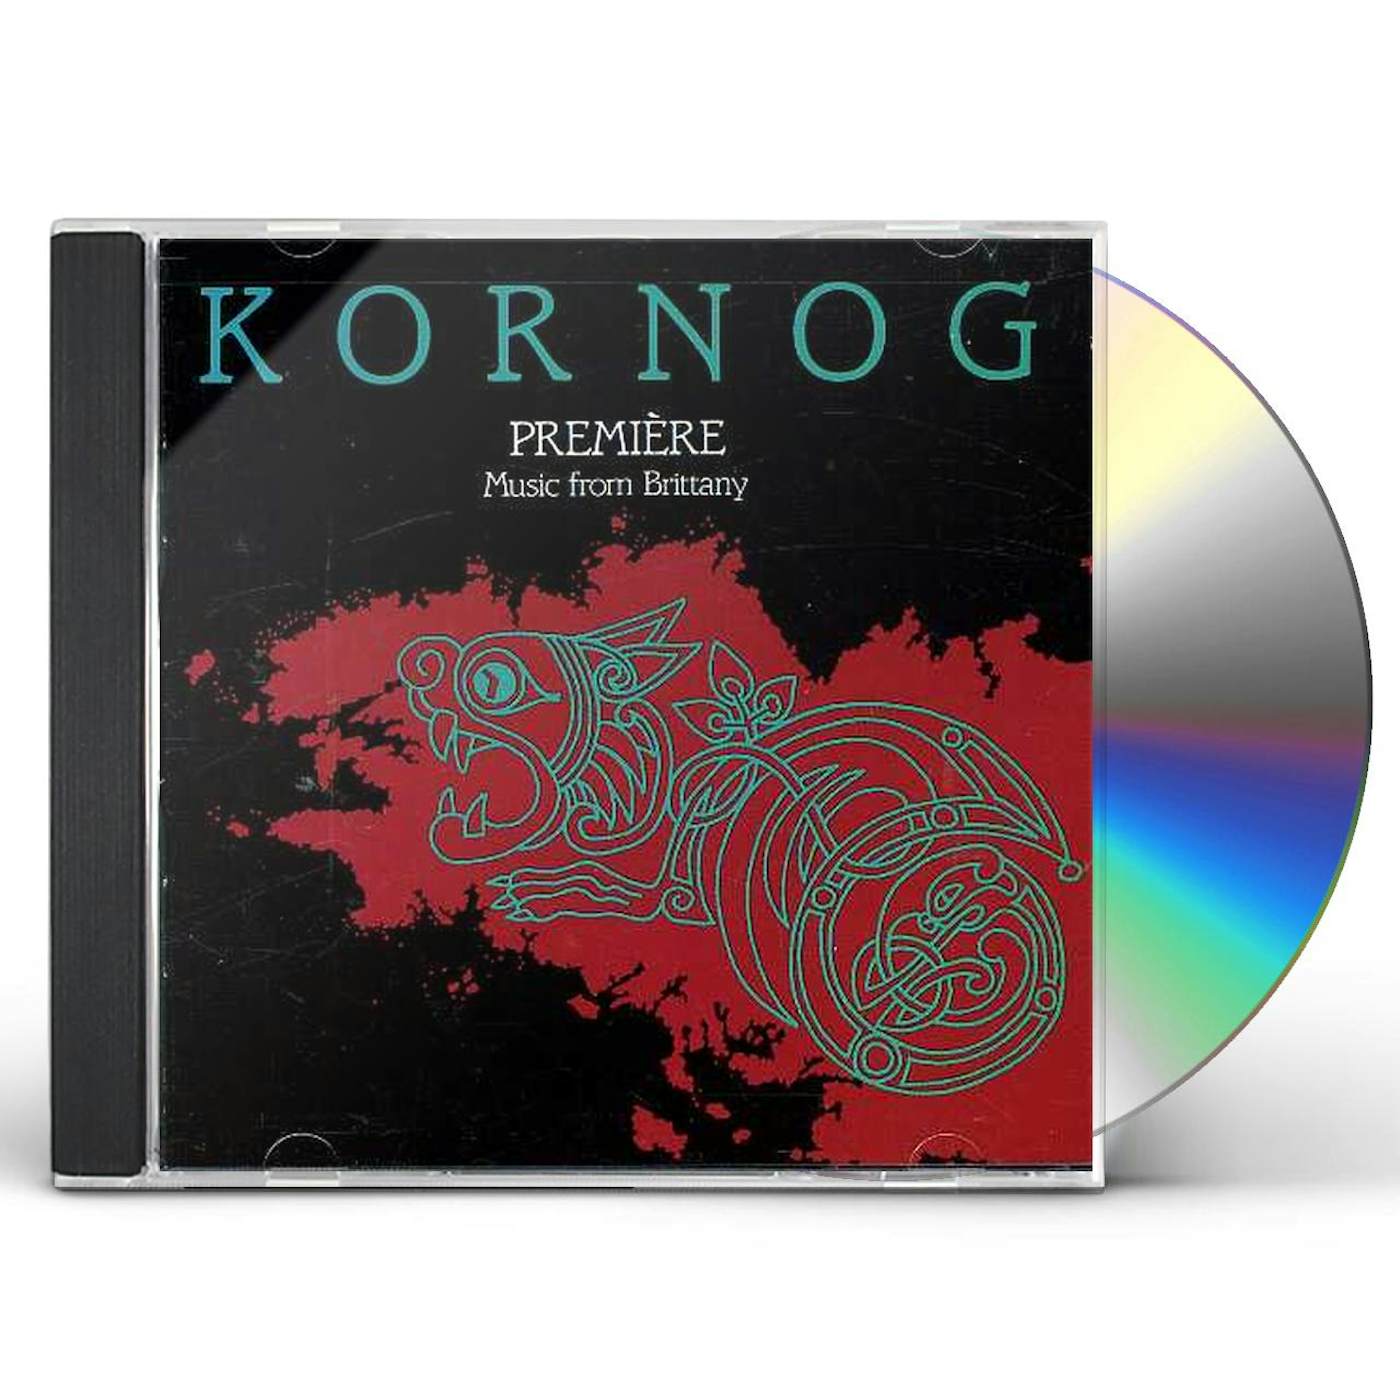 Kornog PREMIERE:MUSIC FROM BRITTANY CD